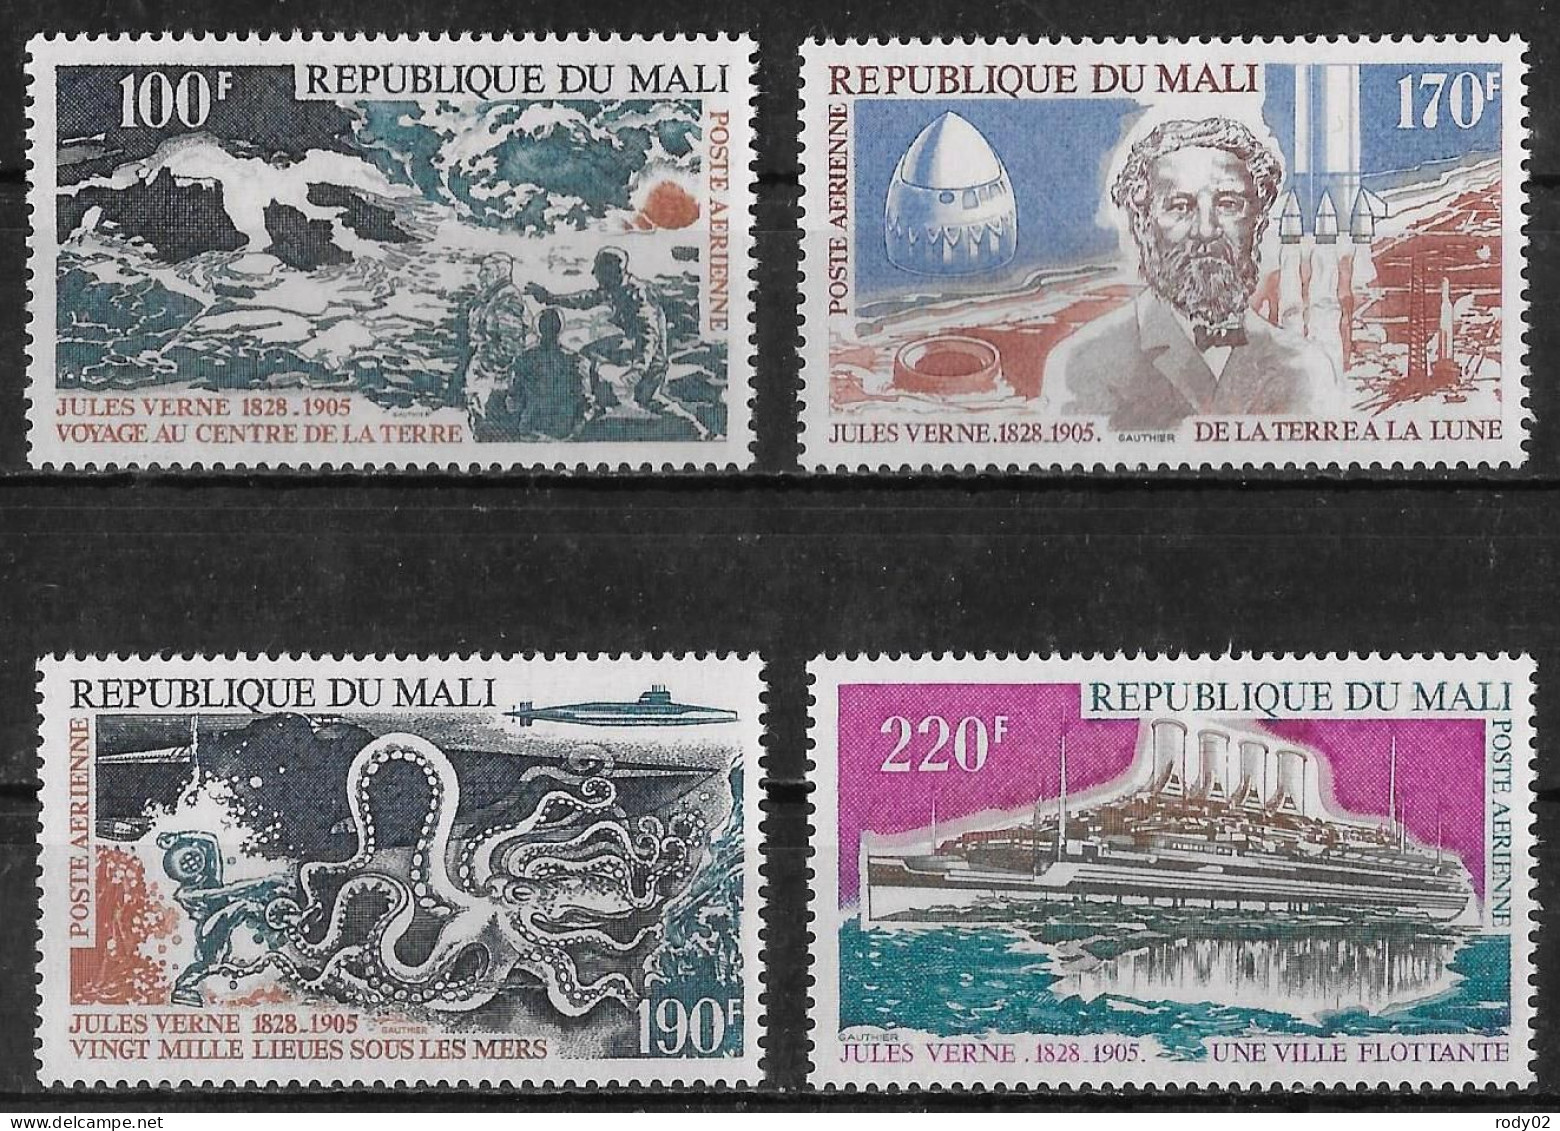 MALI - OEUVRES DE JULES VERNE - PA 239 A 242 - NEUF** MNH - Writers